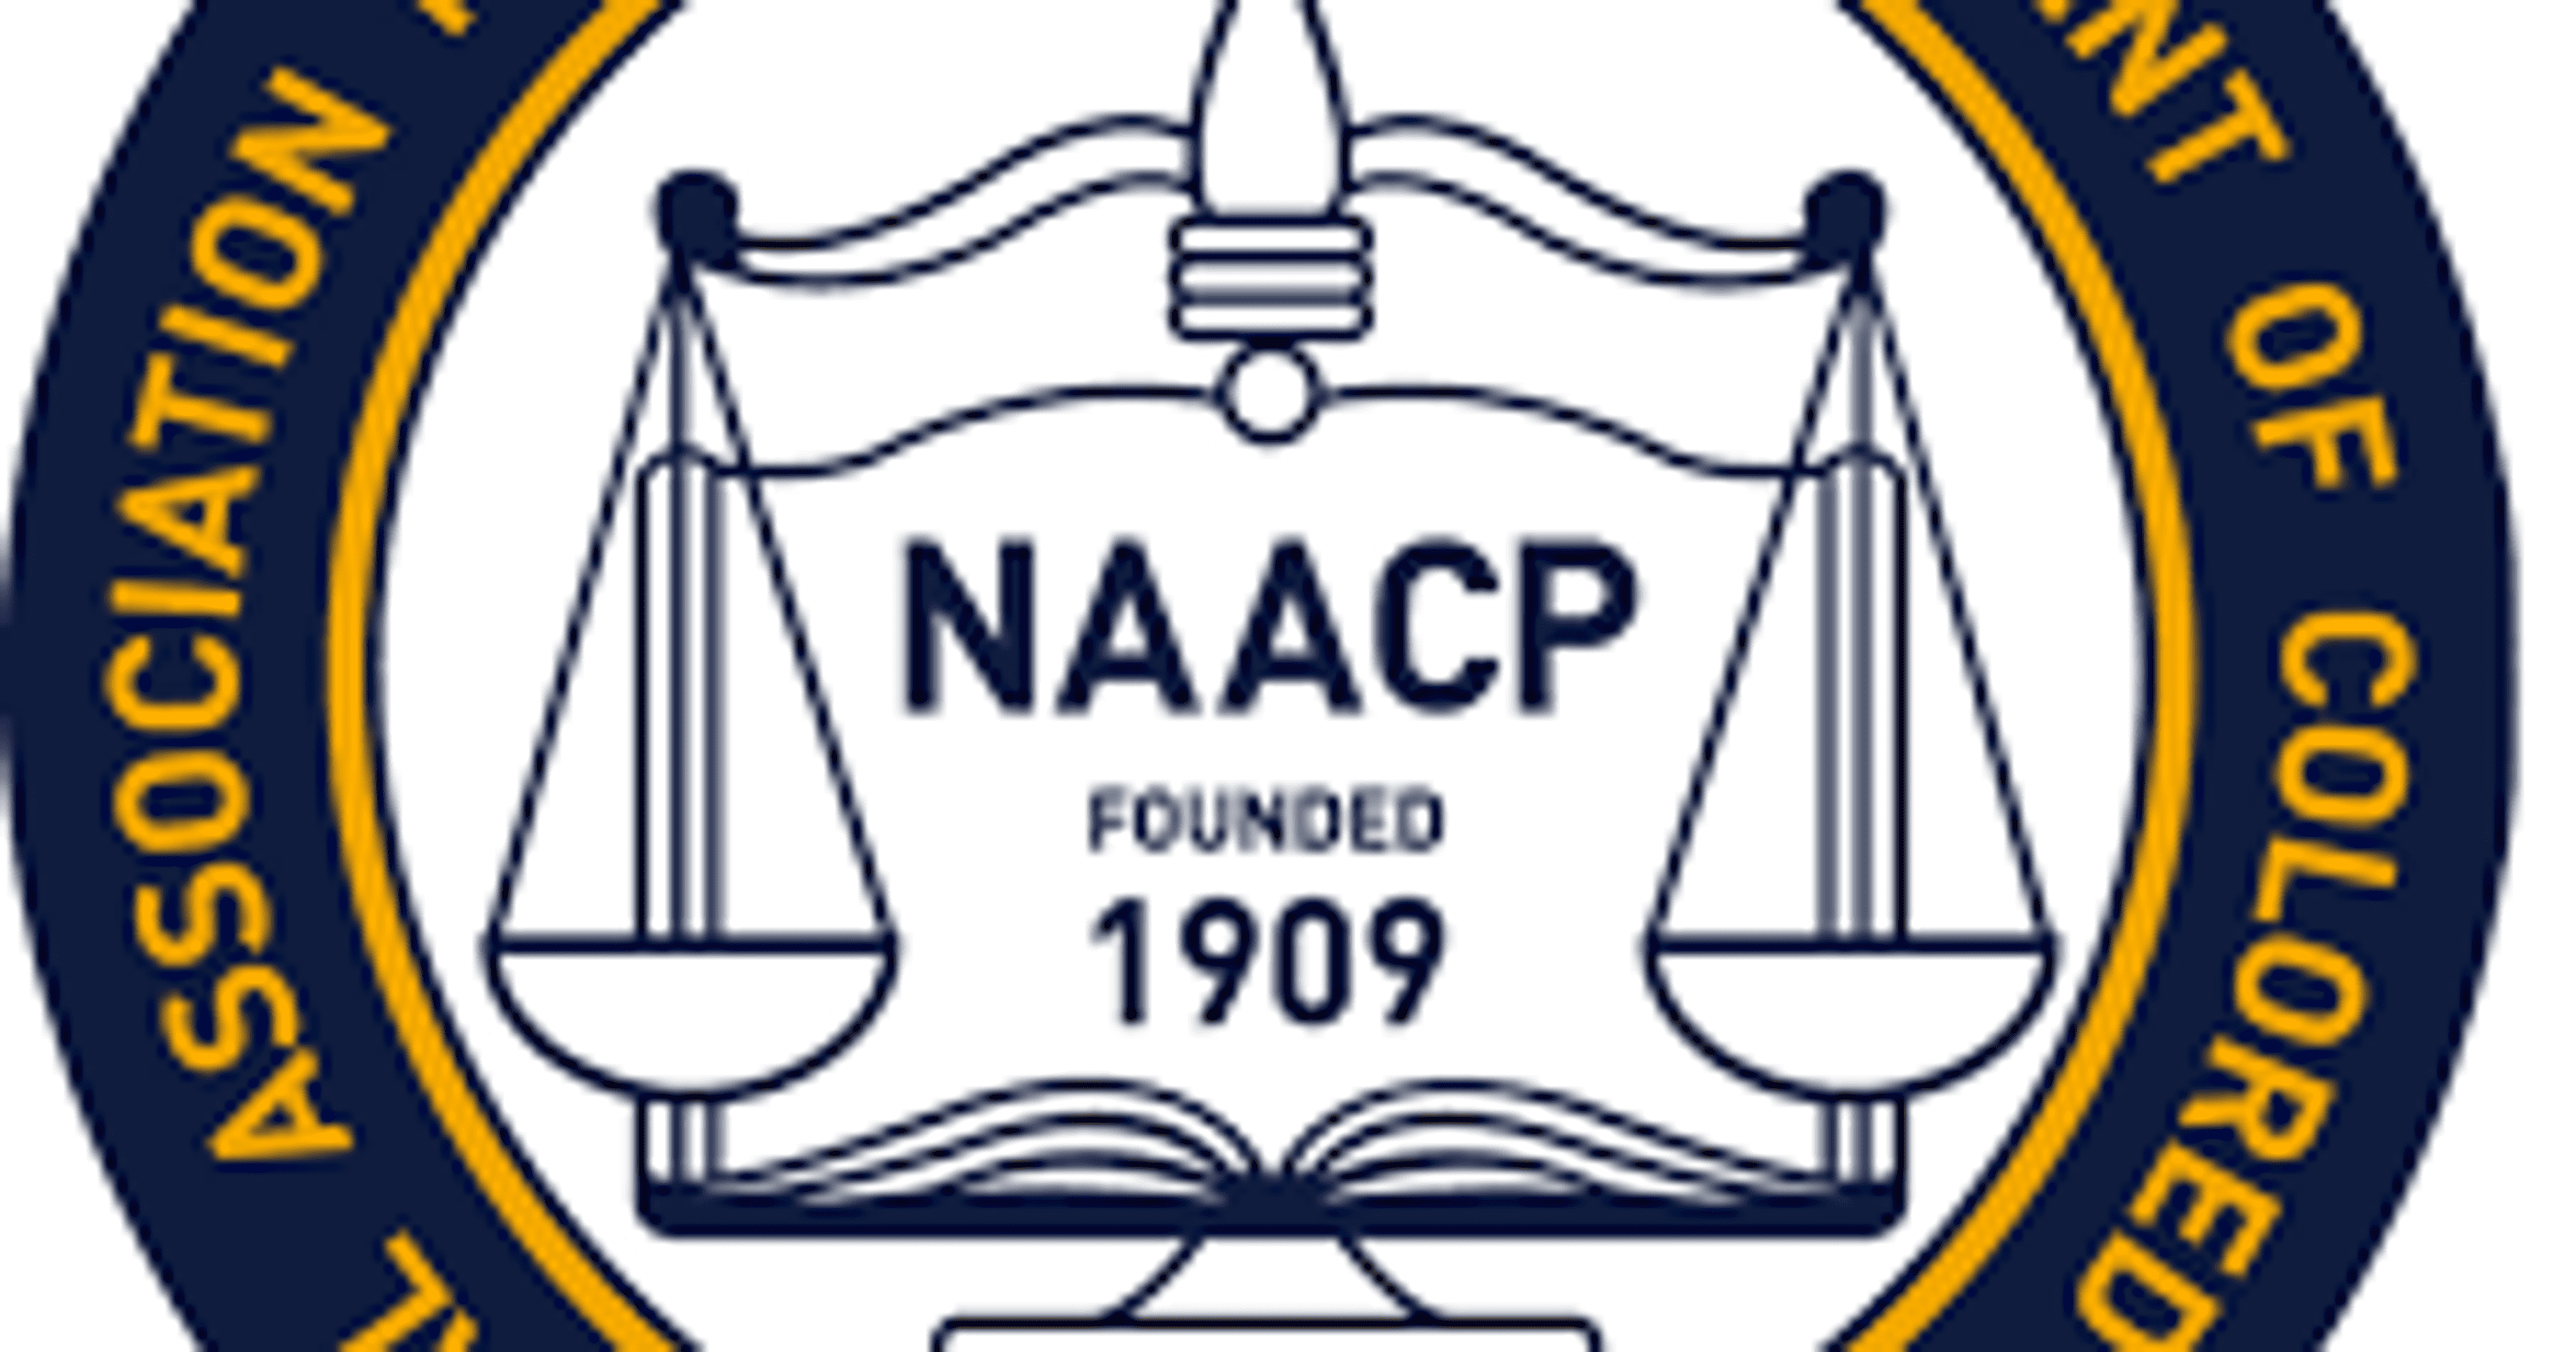 NAACP Logo - NAACP 'Town Hall' meeting set for Thursday in Alexandria